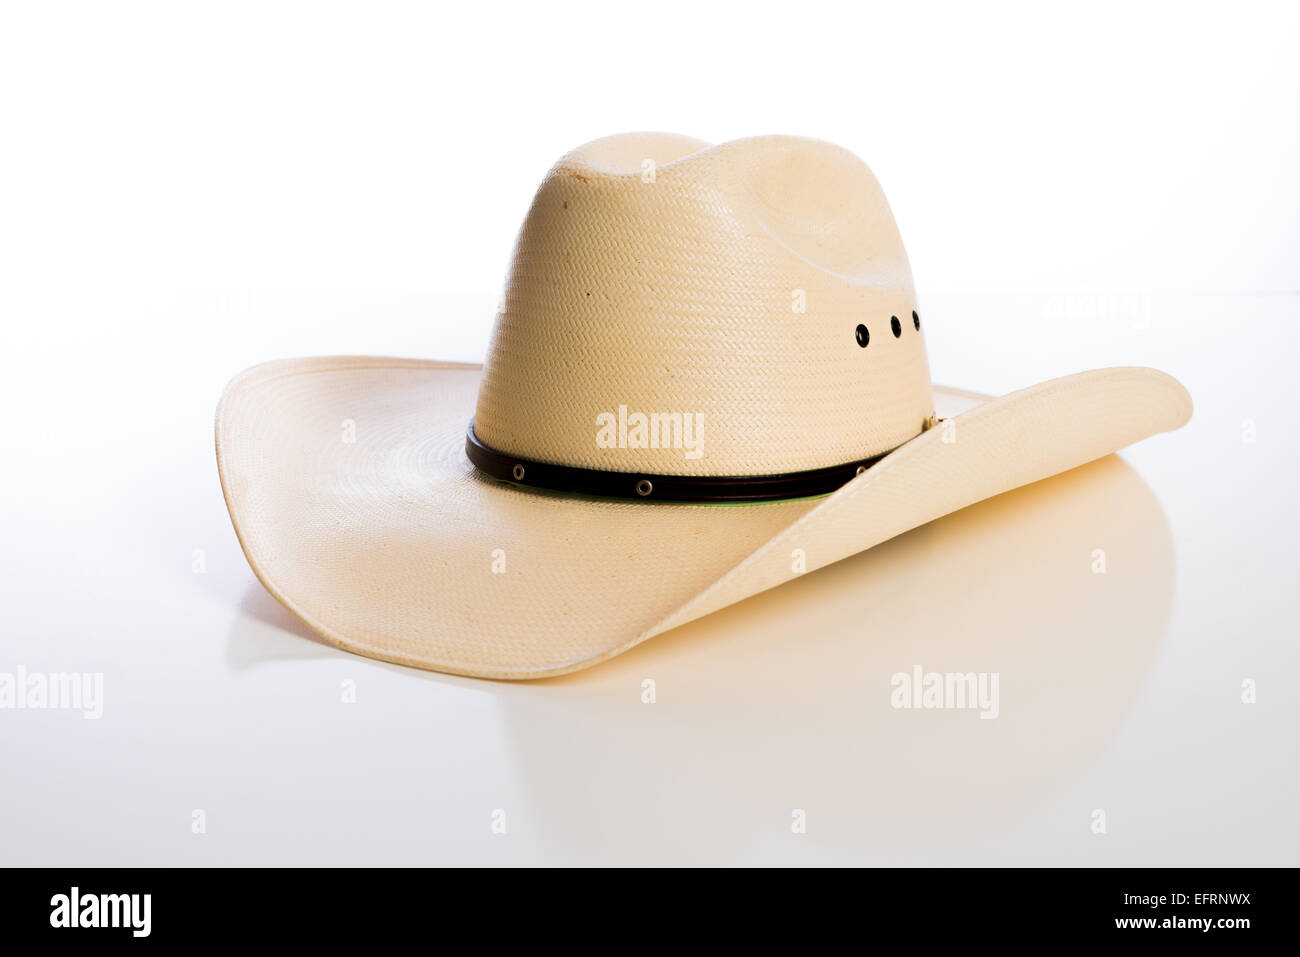 A straw cowboy hat on a white background Stock Photo